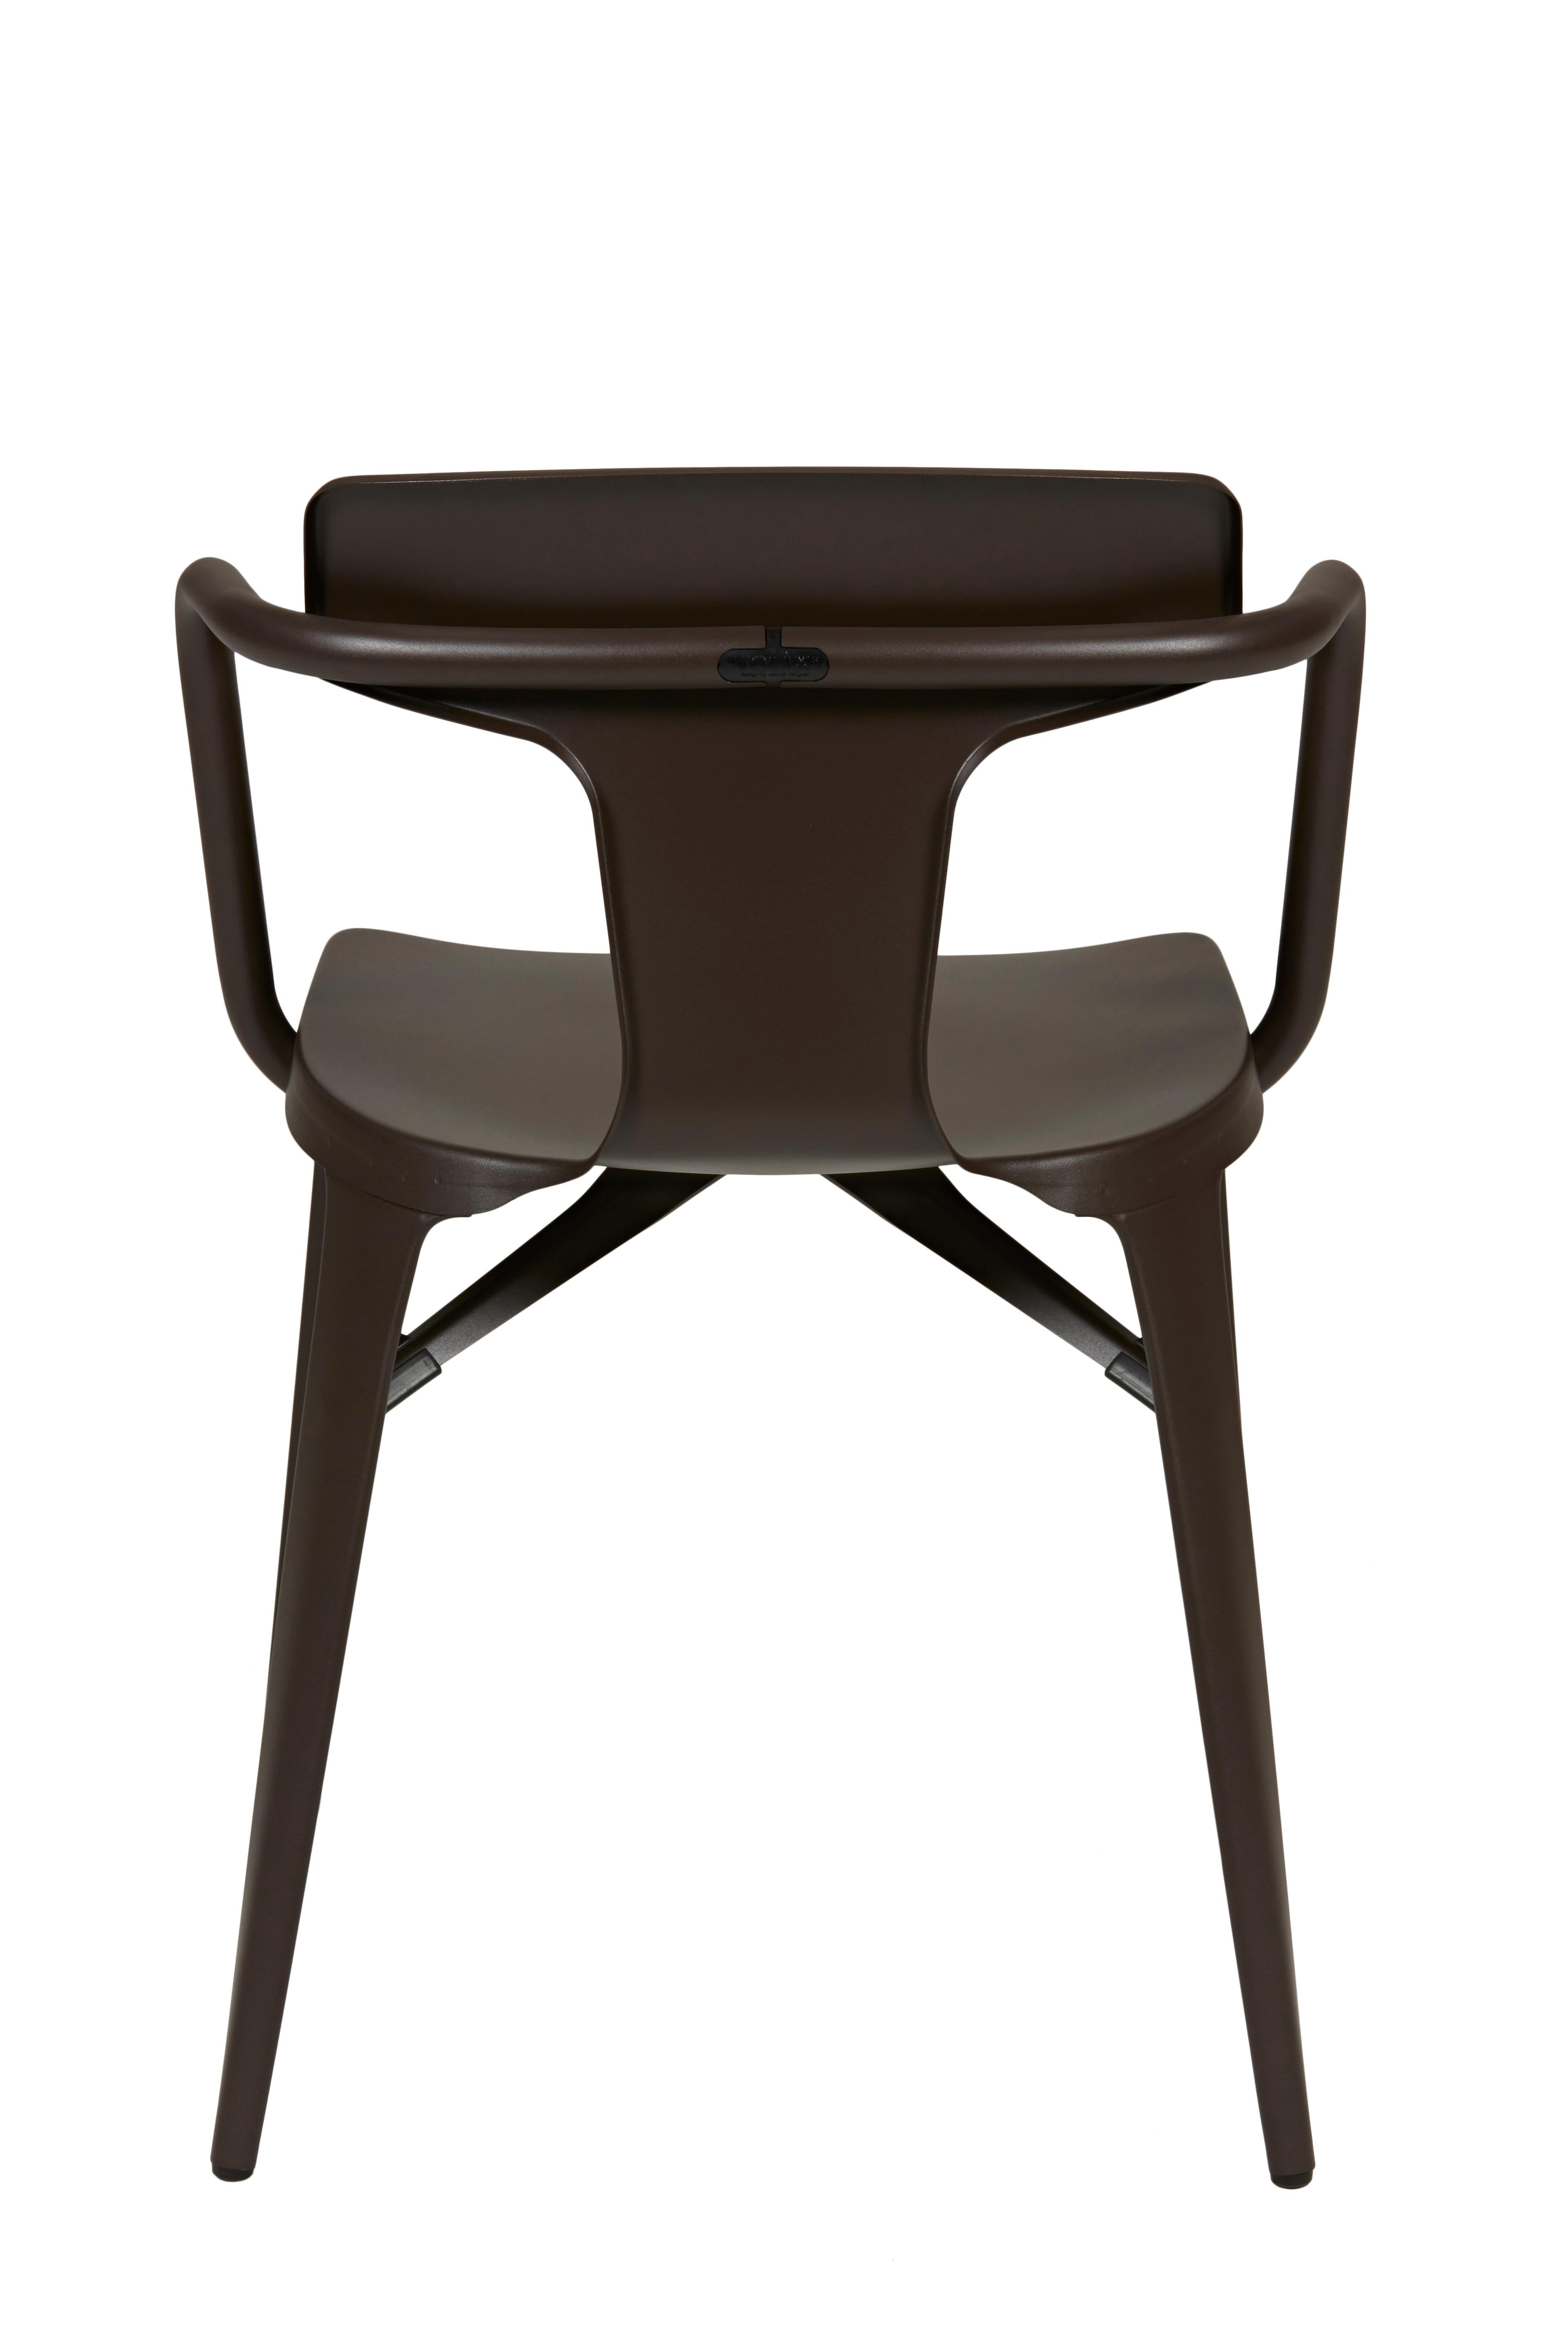 Im Angebot: T14 Chair in Pop Colors by Patrick Norguet and Tolix, Brown (Chocolat Noir) 2